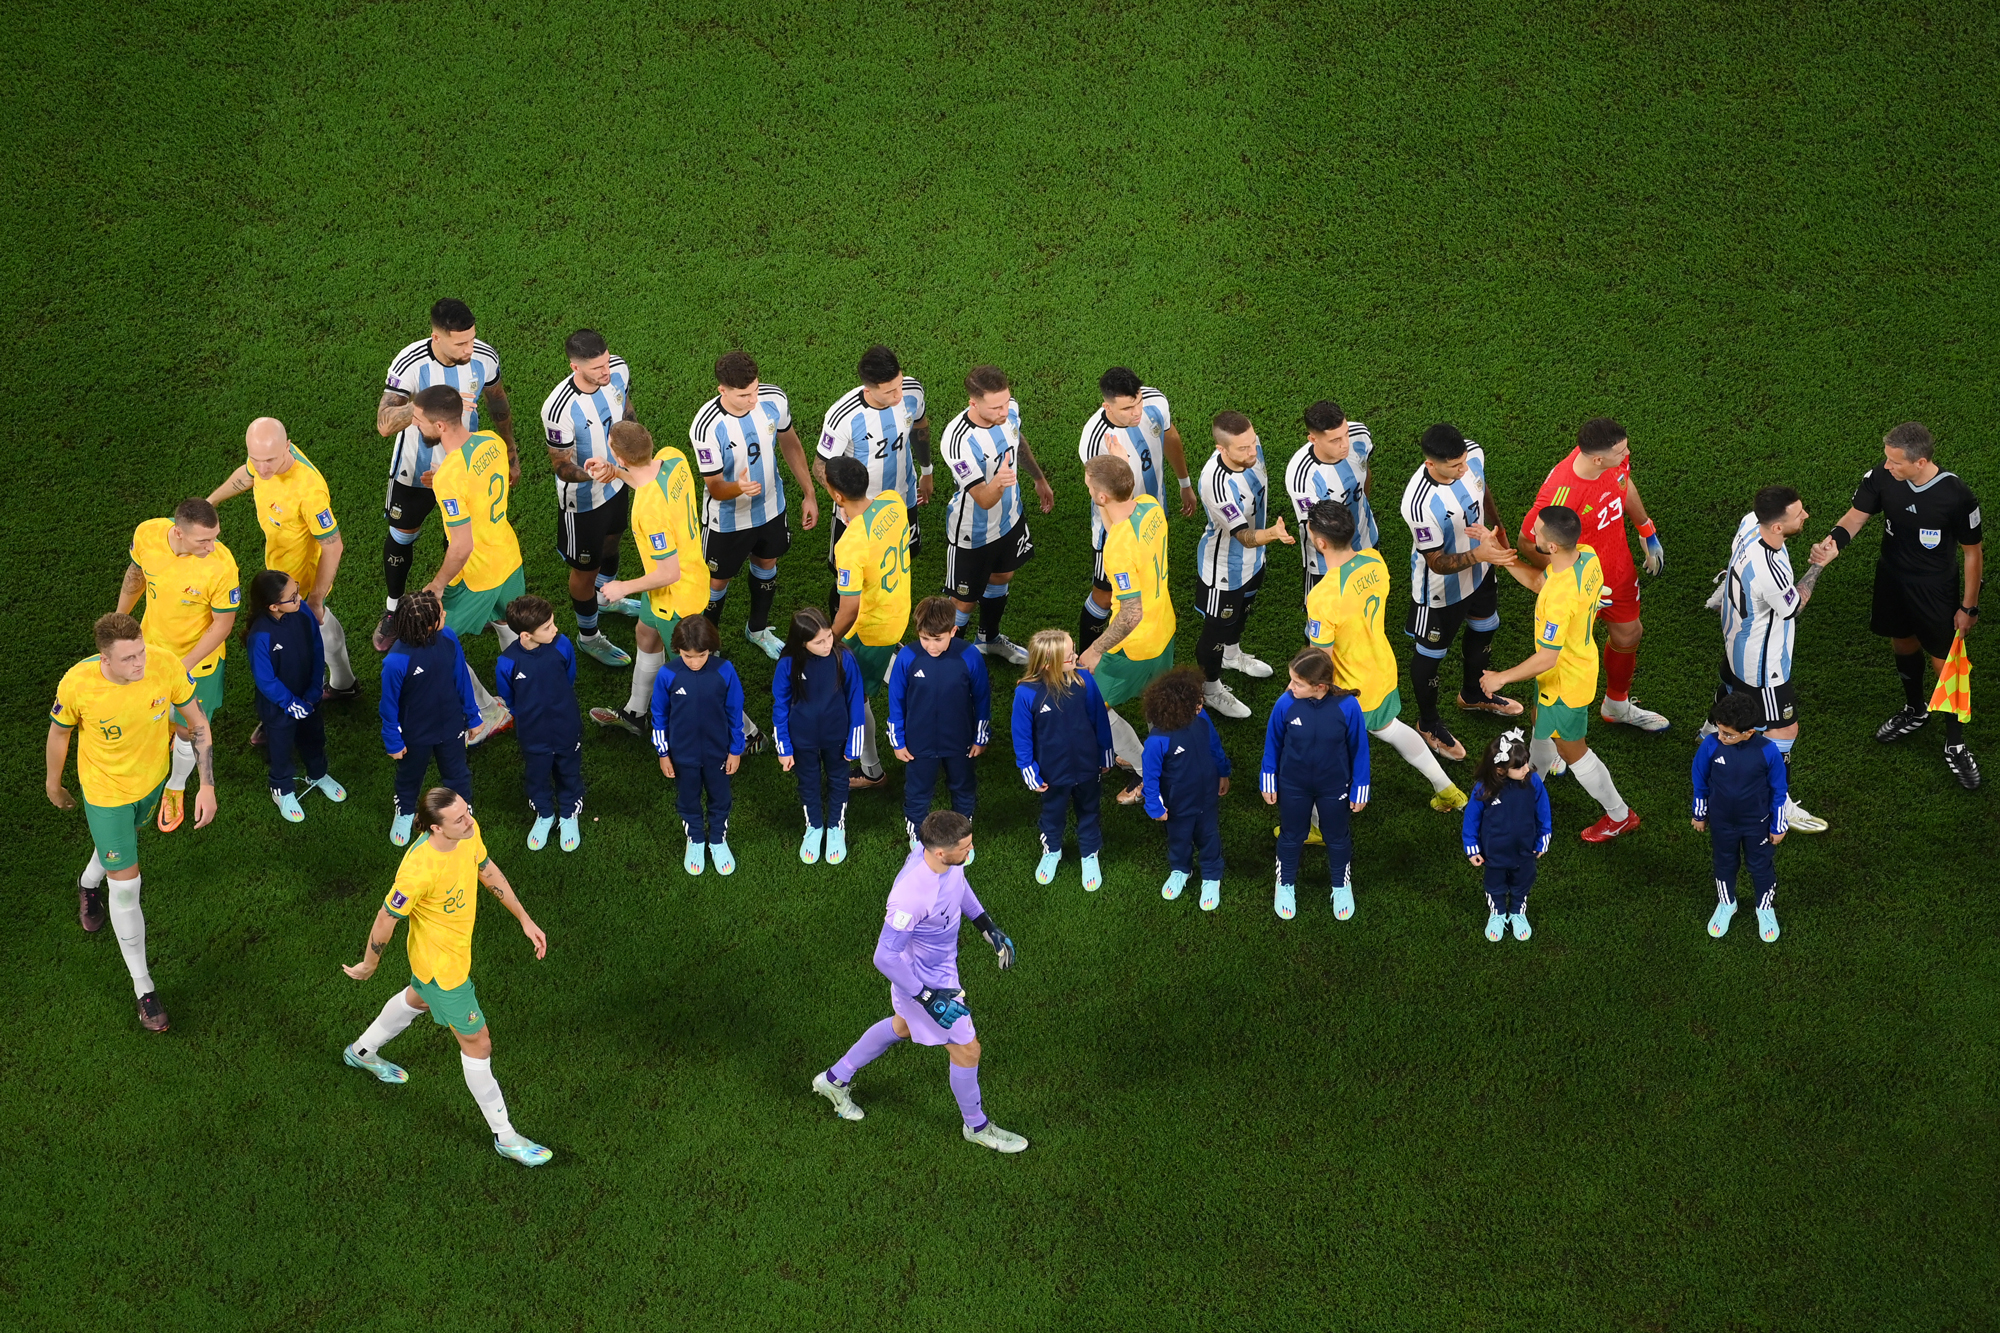 Players shake hands before the match between Argentina and Australia at the Ahmed Ben Ali Stadium in Rennes, Qatar, on Saturday.